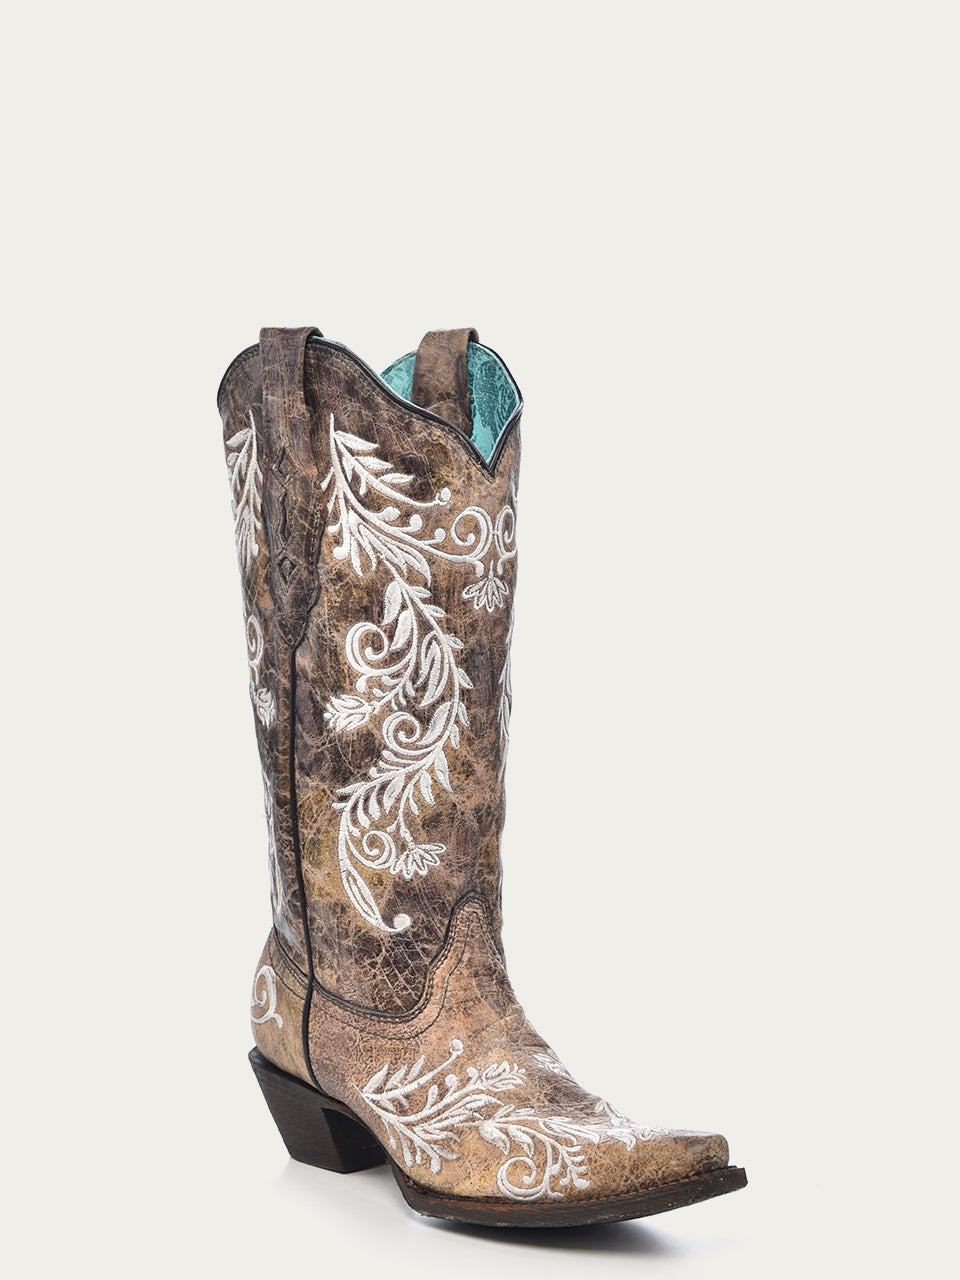 All Women's Western Boots – Corral Boot Company LLC